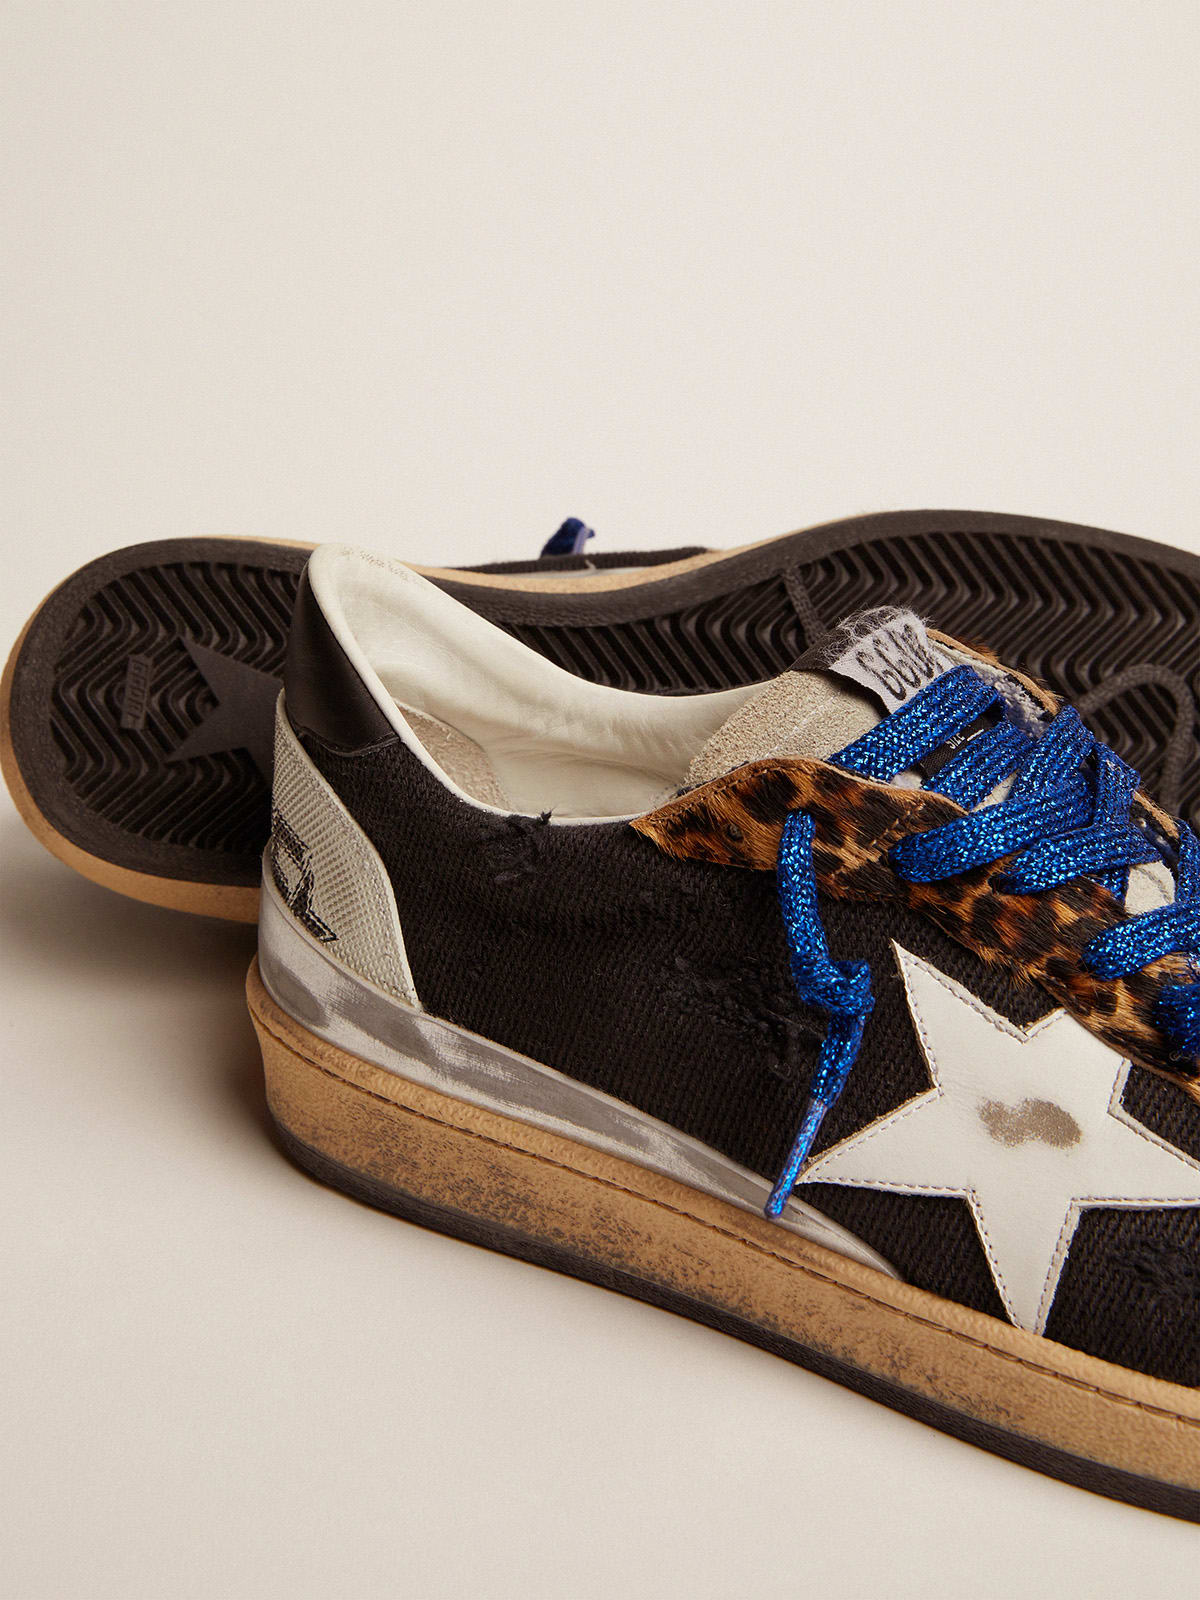 Golden Goose - Ball Star sneakers in black canvas, leopard-print pony skin inserts and multi-foxing in 